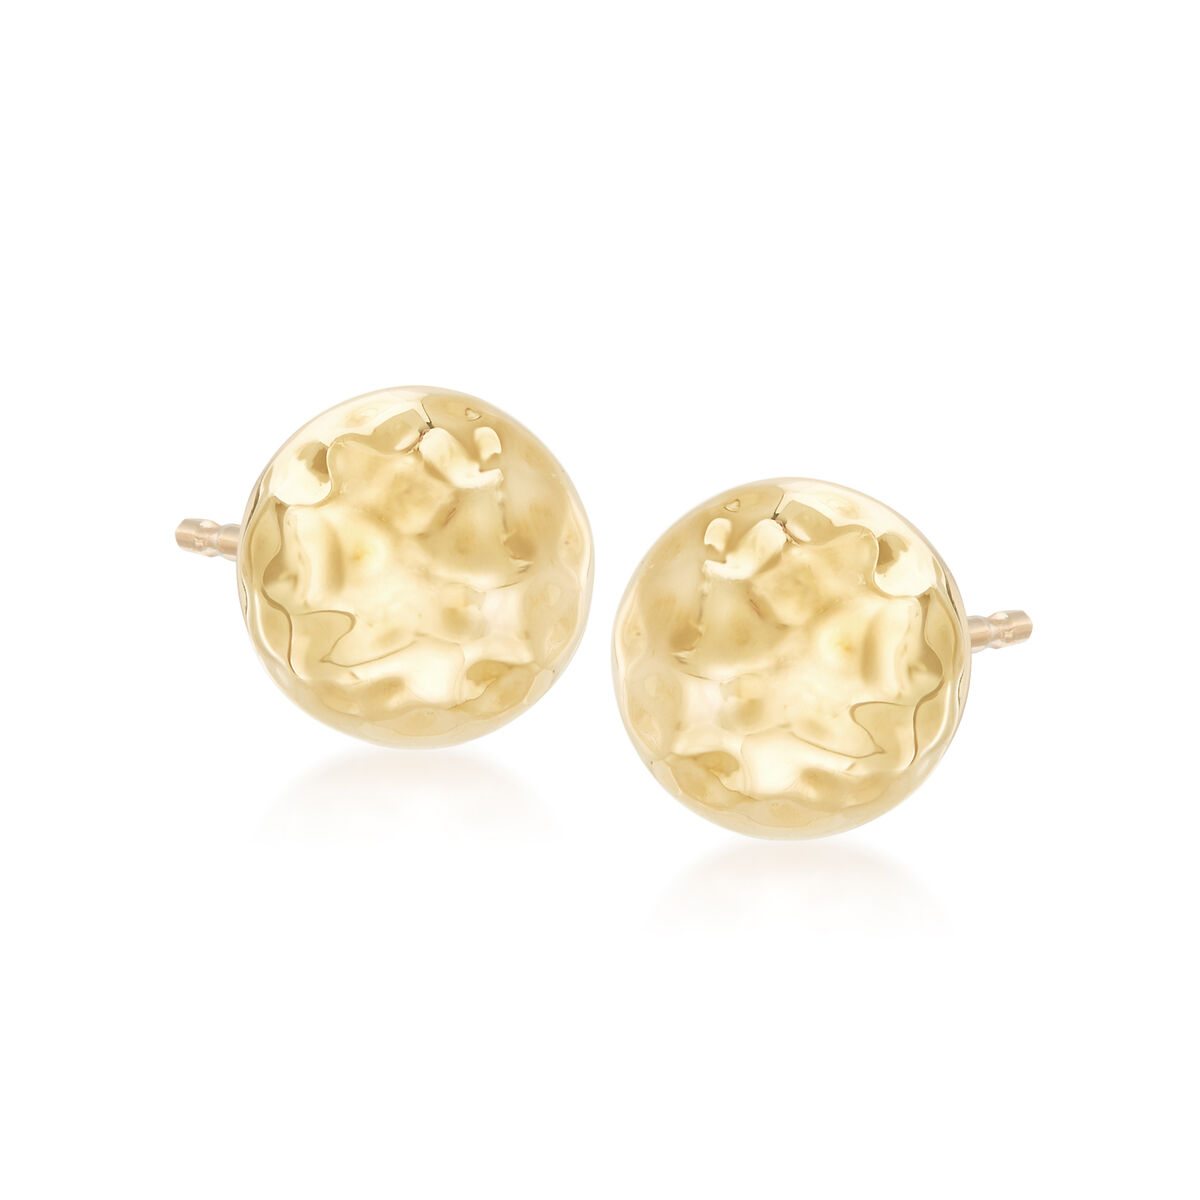 8mm Hammered Stud Earrings in 14kt Yellow Gold